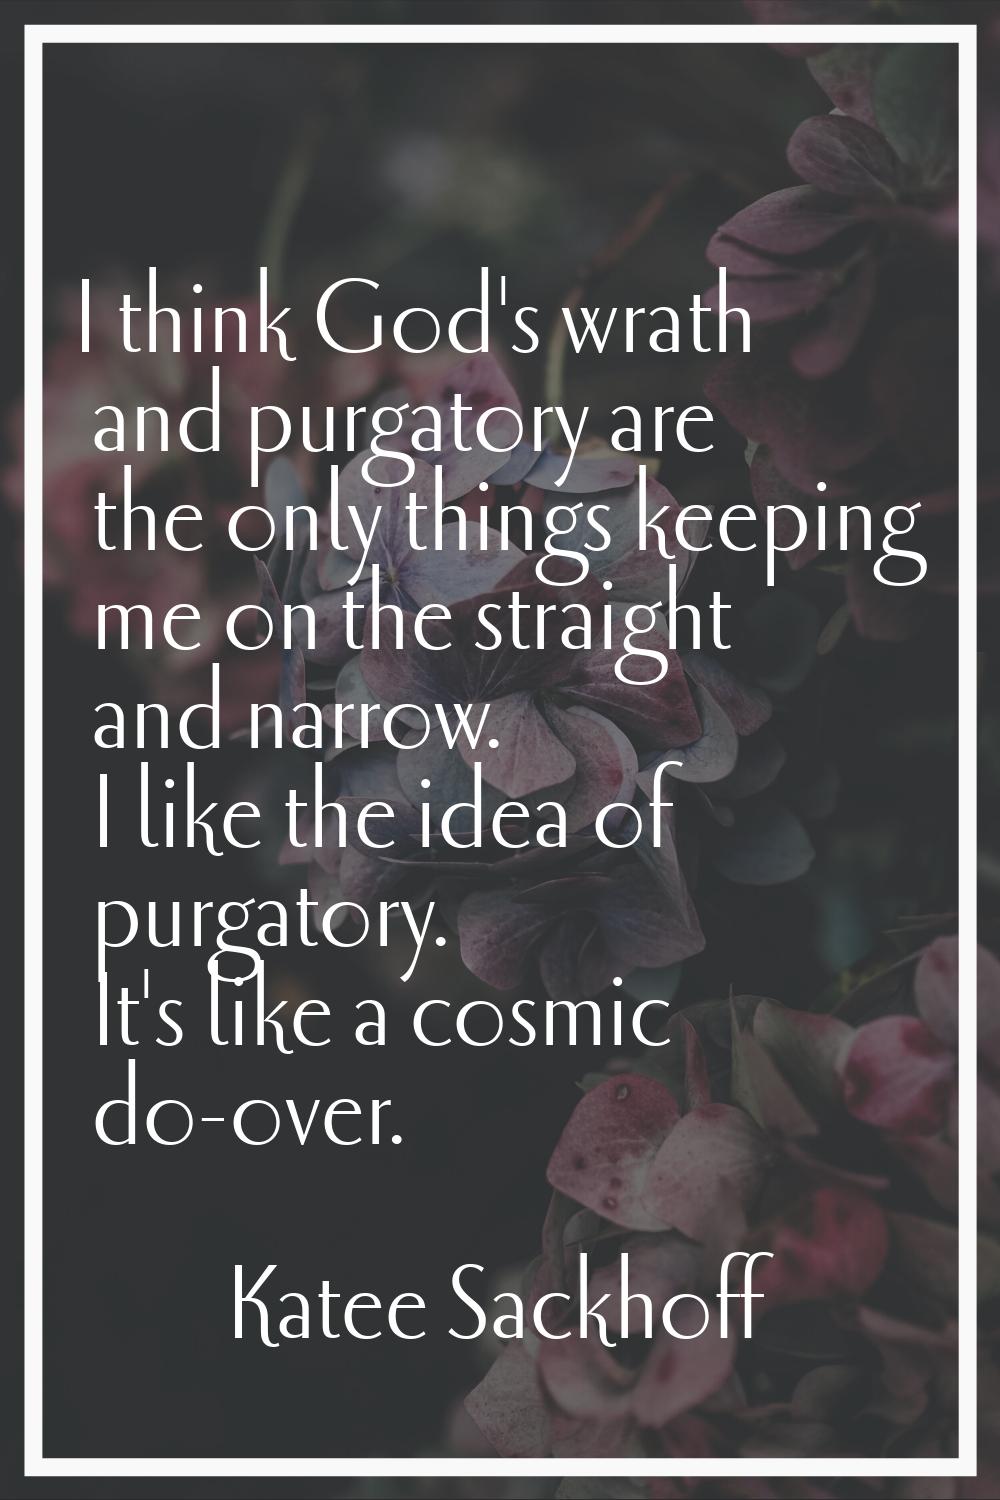 I think God's wrath and purgatory are the only things keeping me on the straight and narrow. I like